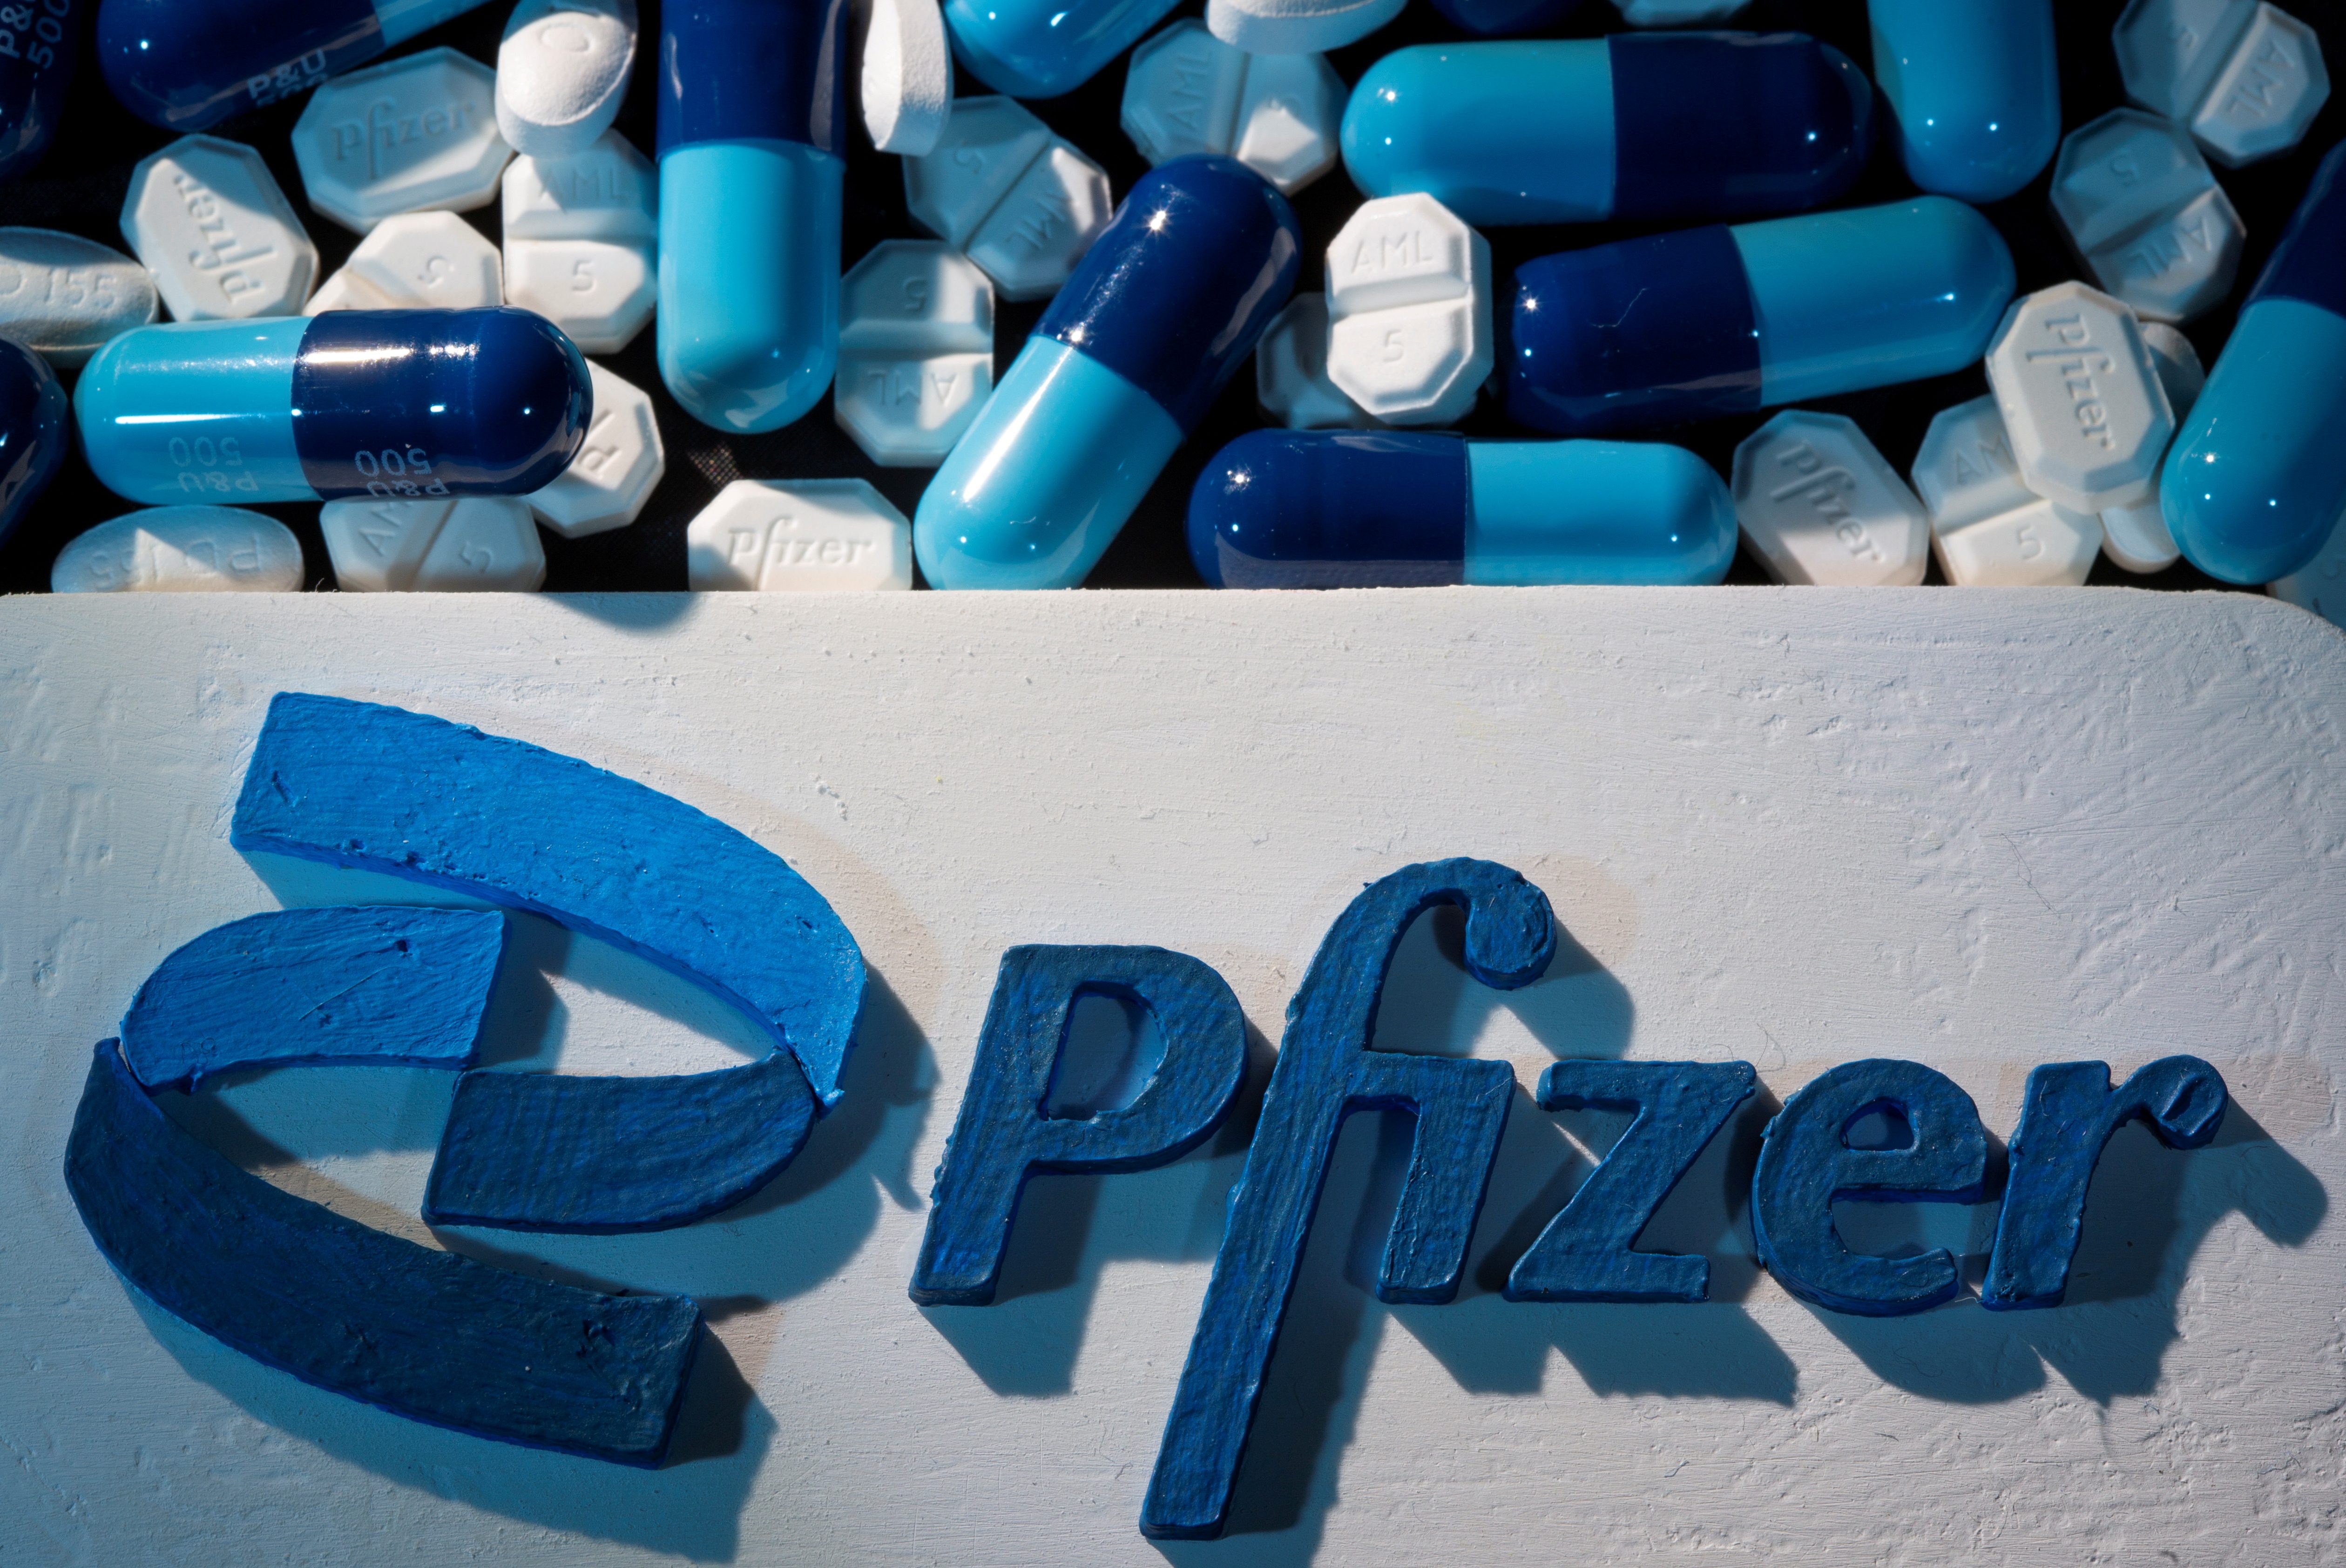 Pfizer says antiviral pill cuts risk of severe COVID-19 by 89%